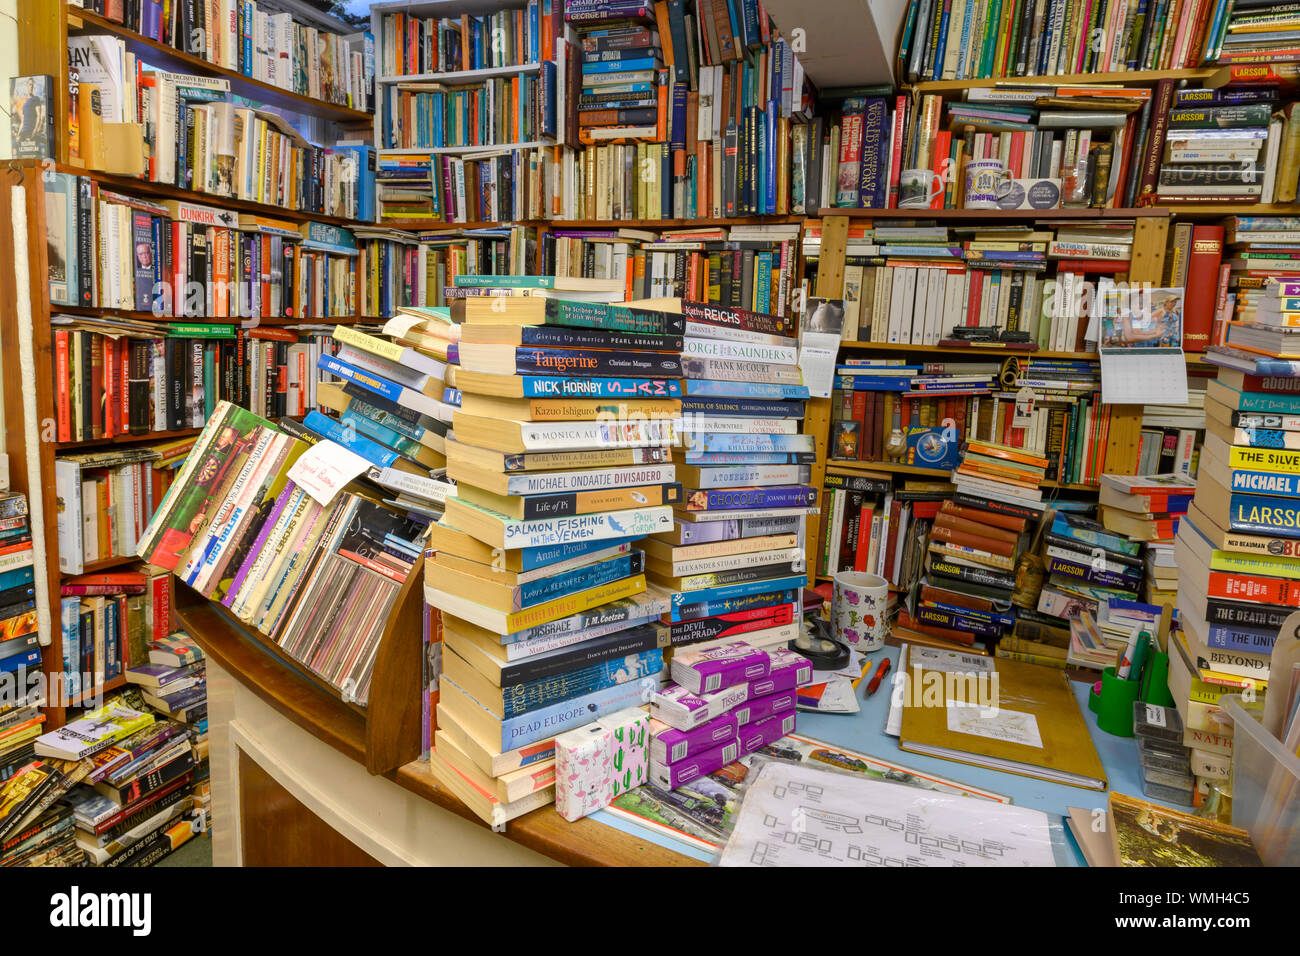 Interior of a very crowded second-hand bookshop. Stock Photo